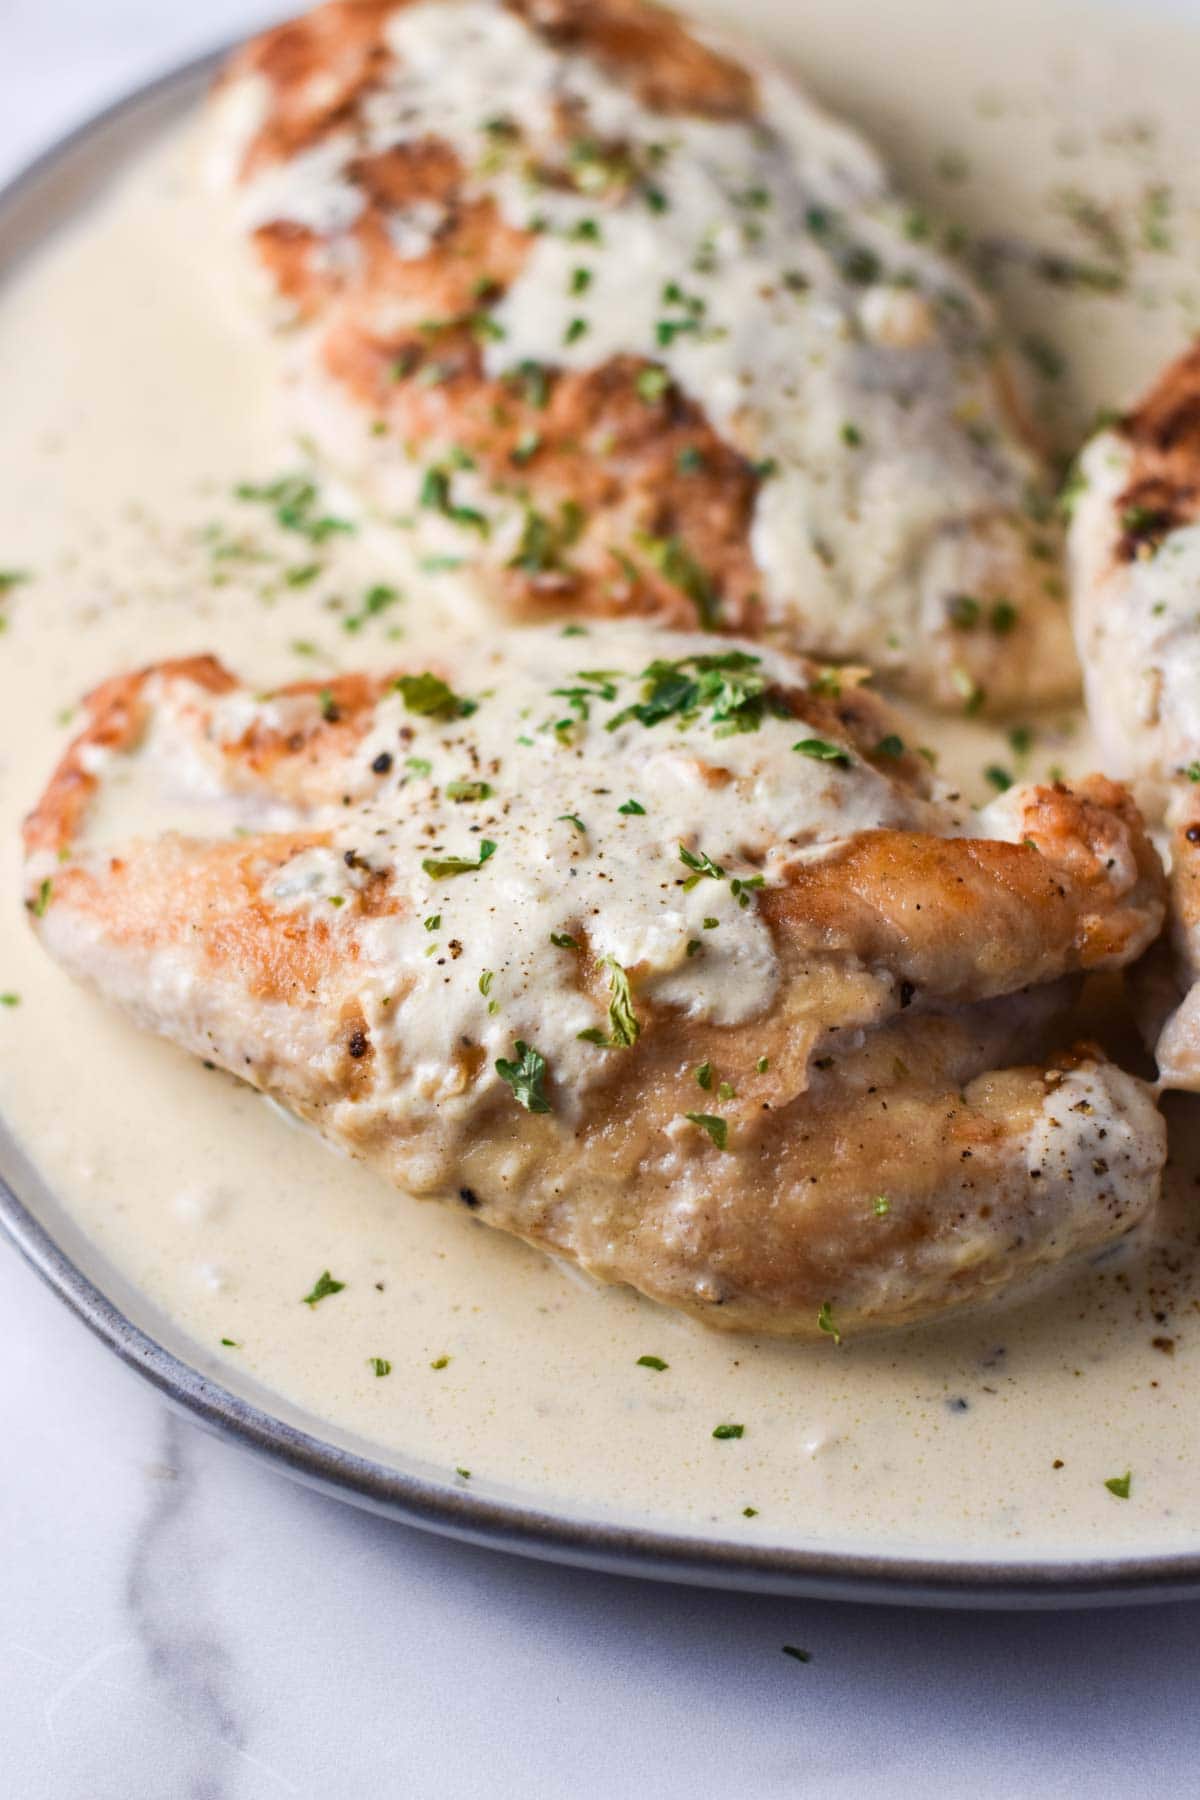 Topping seared chicken with cream sauce.